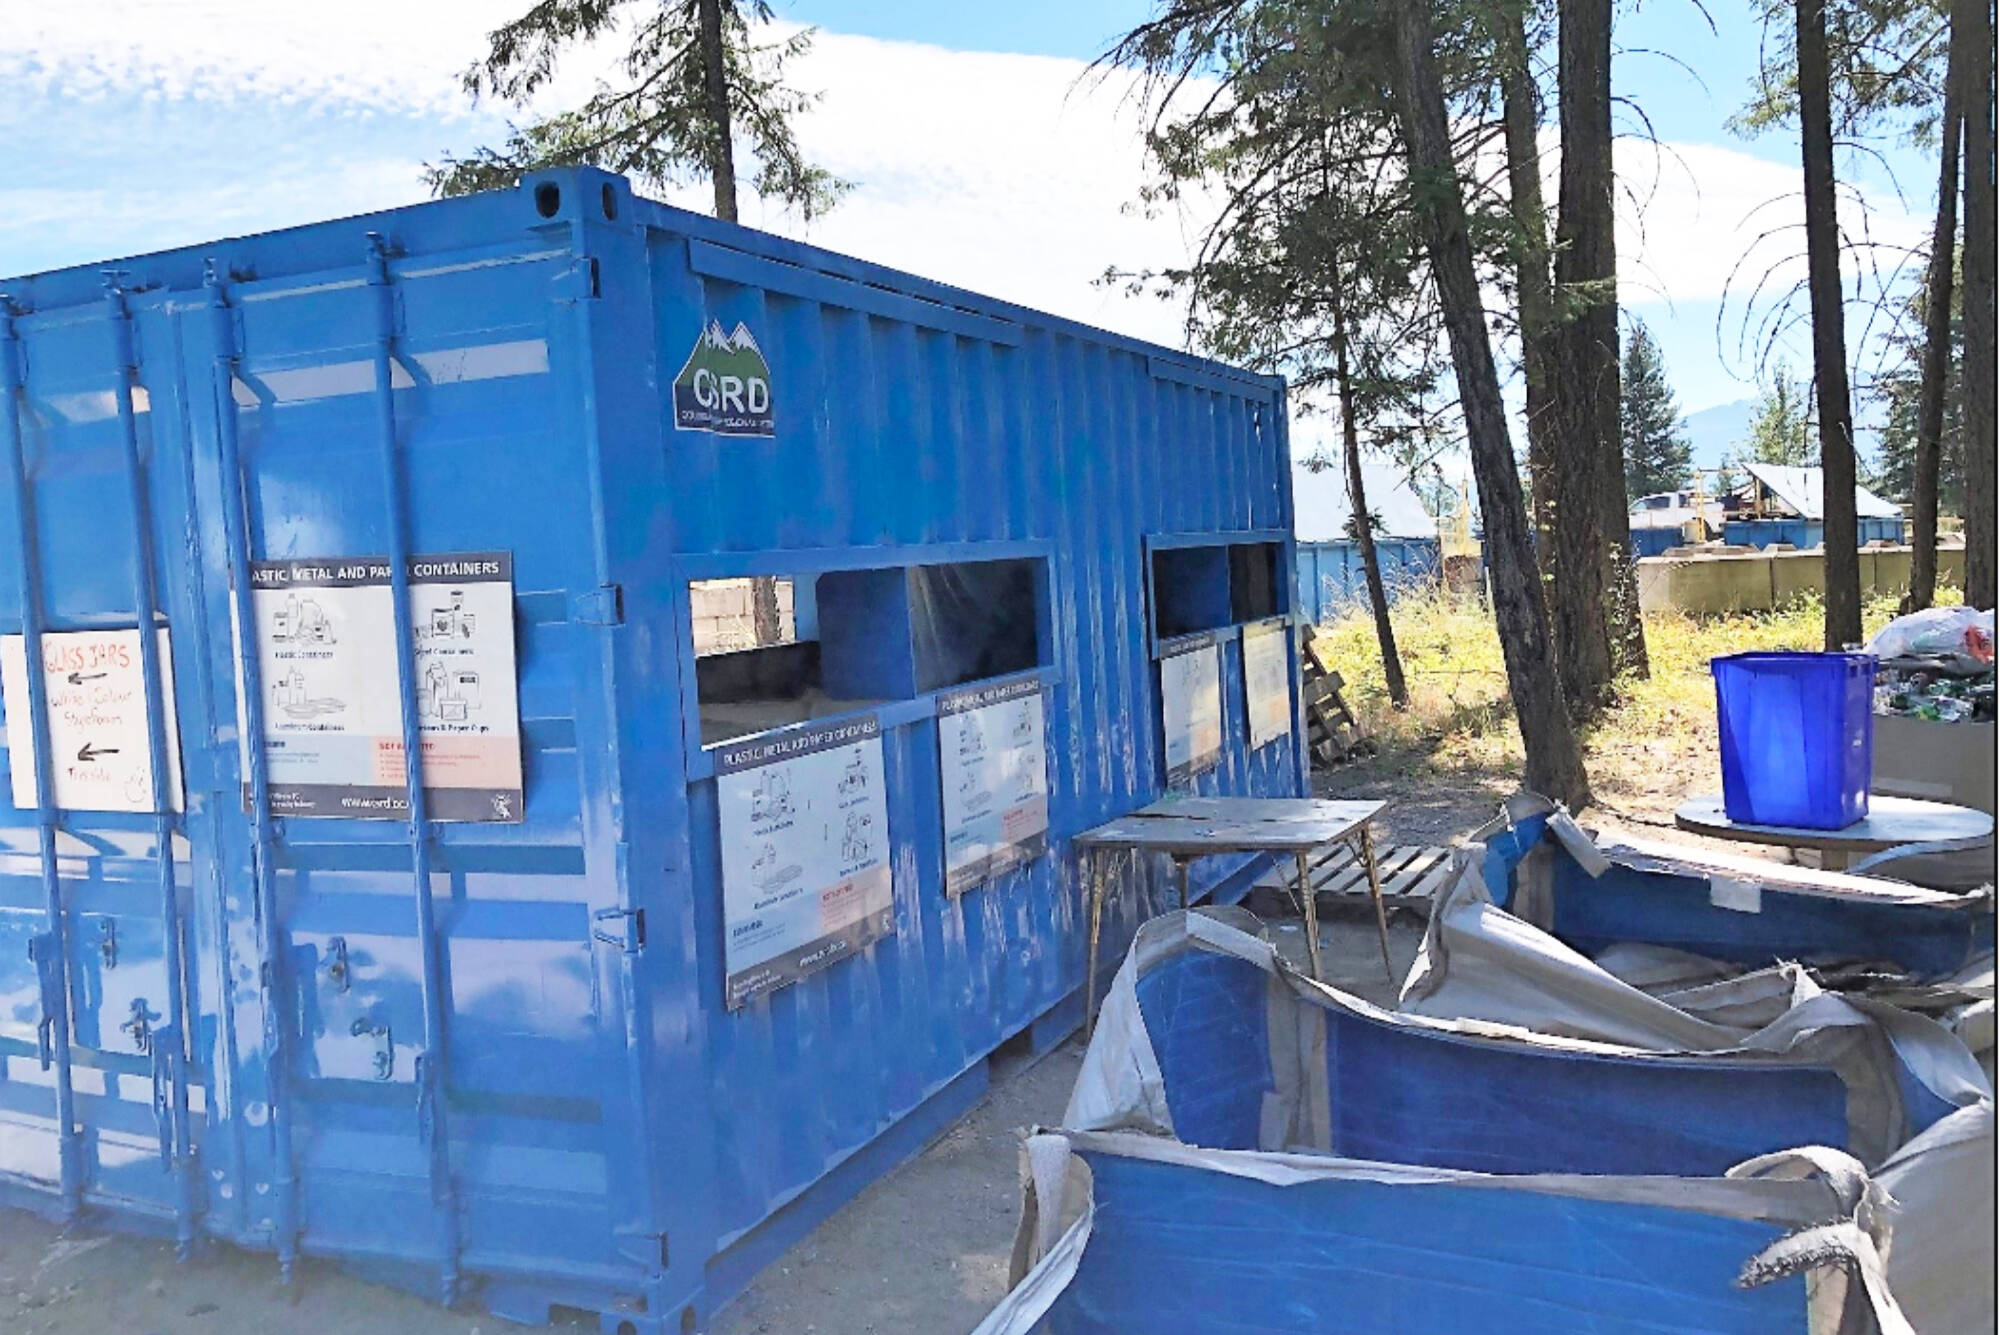 The Scotch Creek Transfer Station includes one of nine rural recycling depots within the Columbia Shuswap Regional District that could be financially impacted by changes proposed by RecycleBC. (CSRD image)